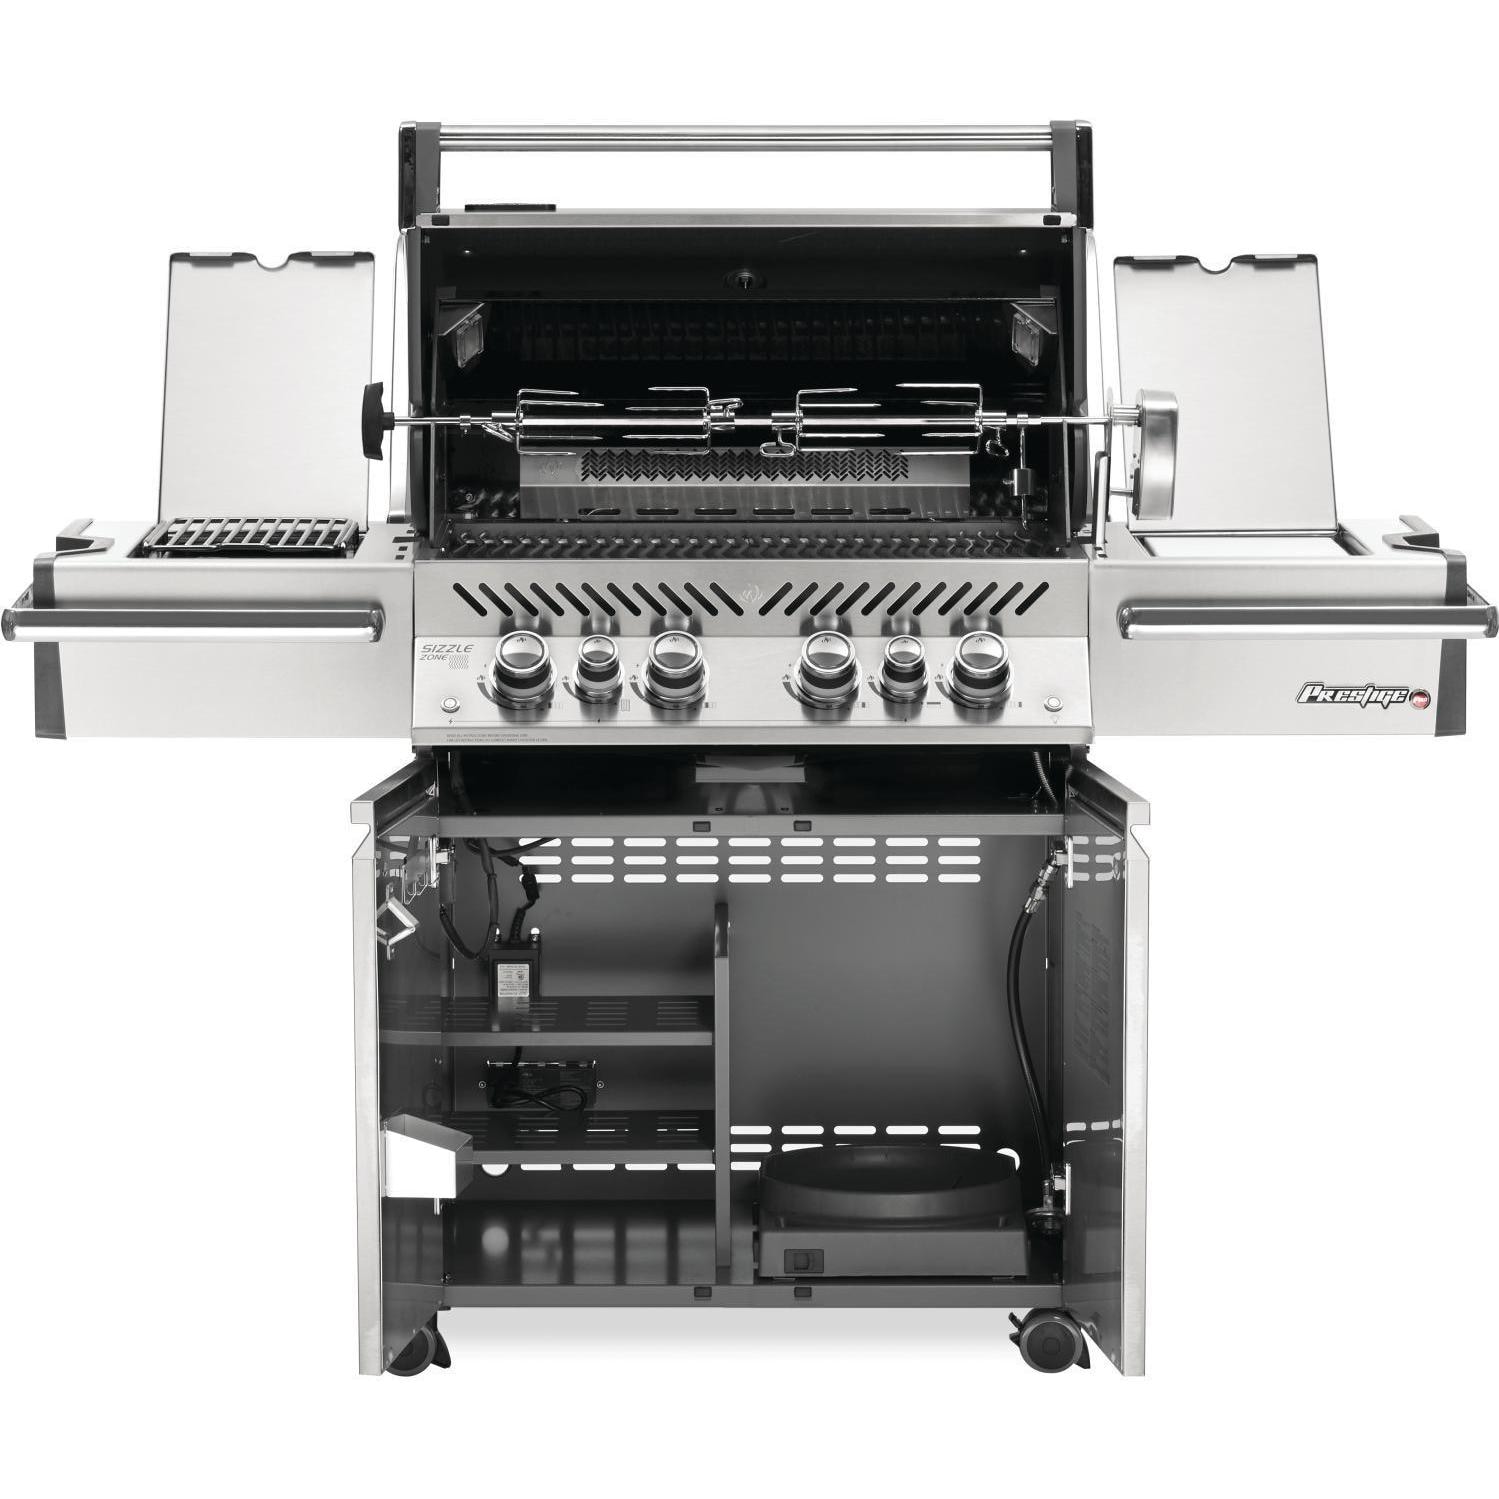 Napoleon Prestige Pro 500 Propane Gas Grill With Infrared Rear Burner And Infrared Side Burners - image 4 of 6